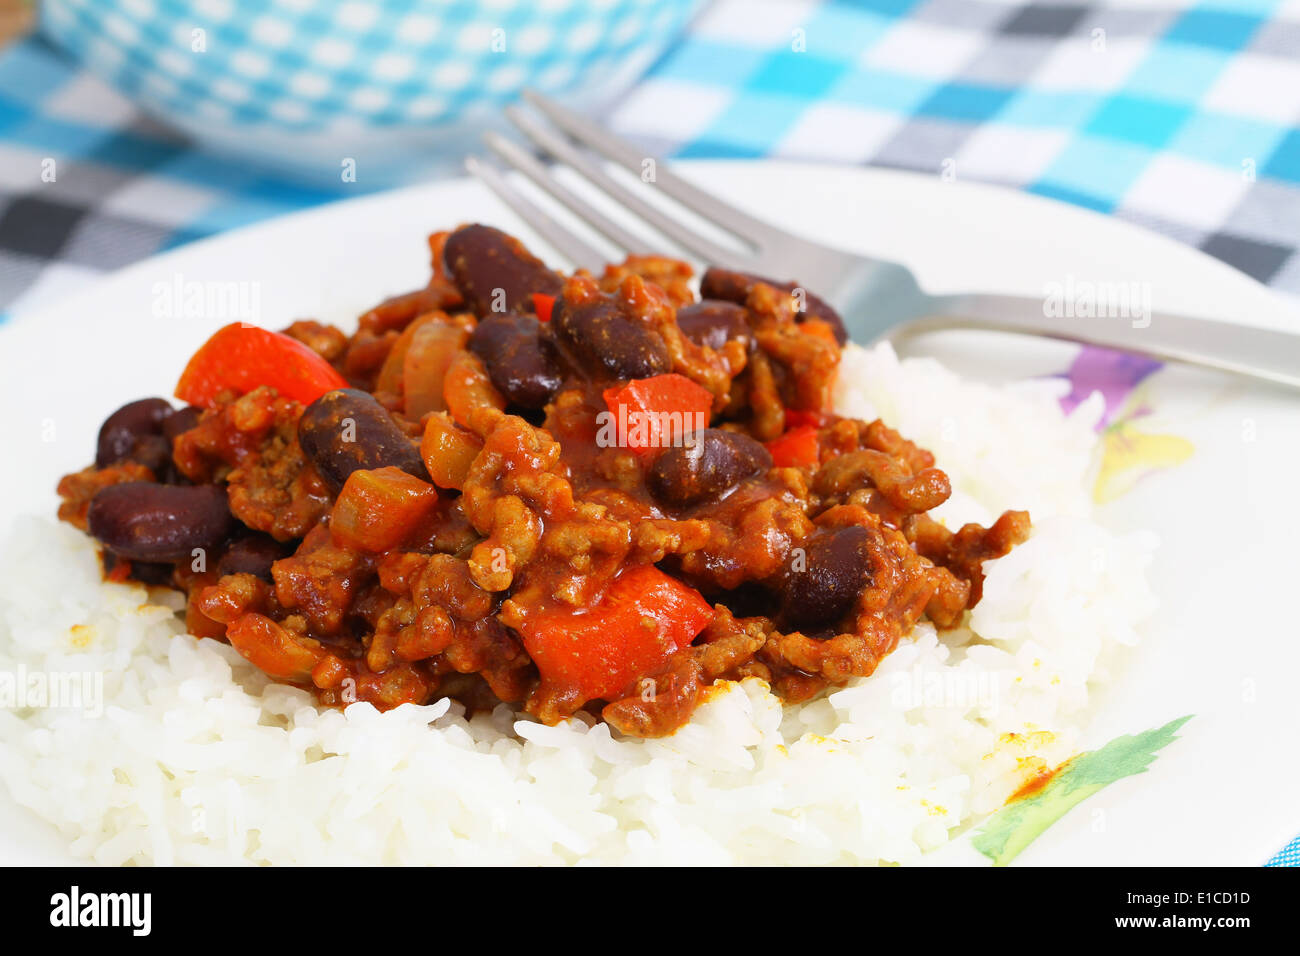 Chili con carne with rice, close up Stock Photo